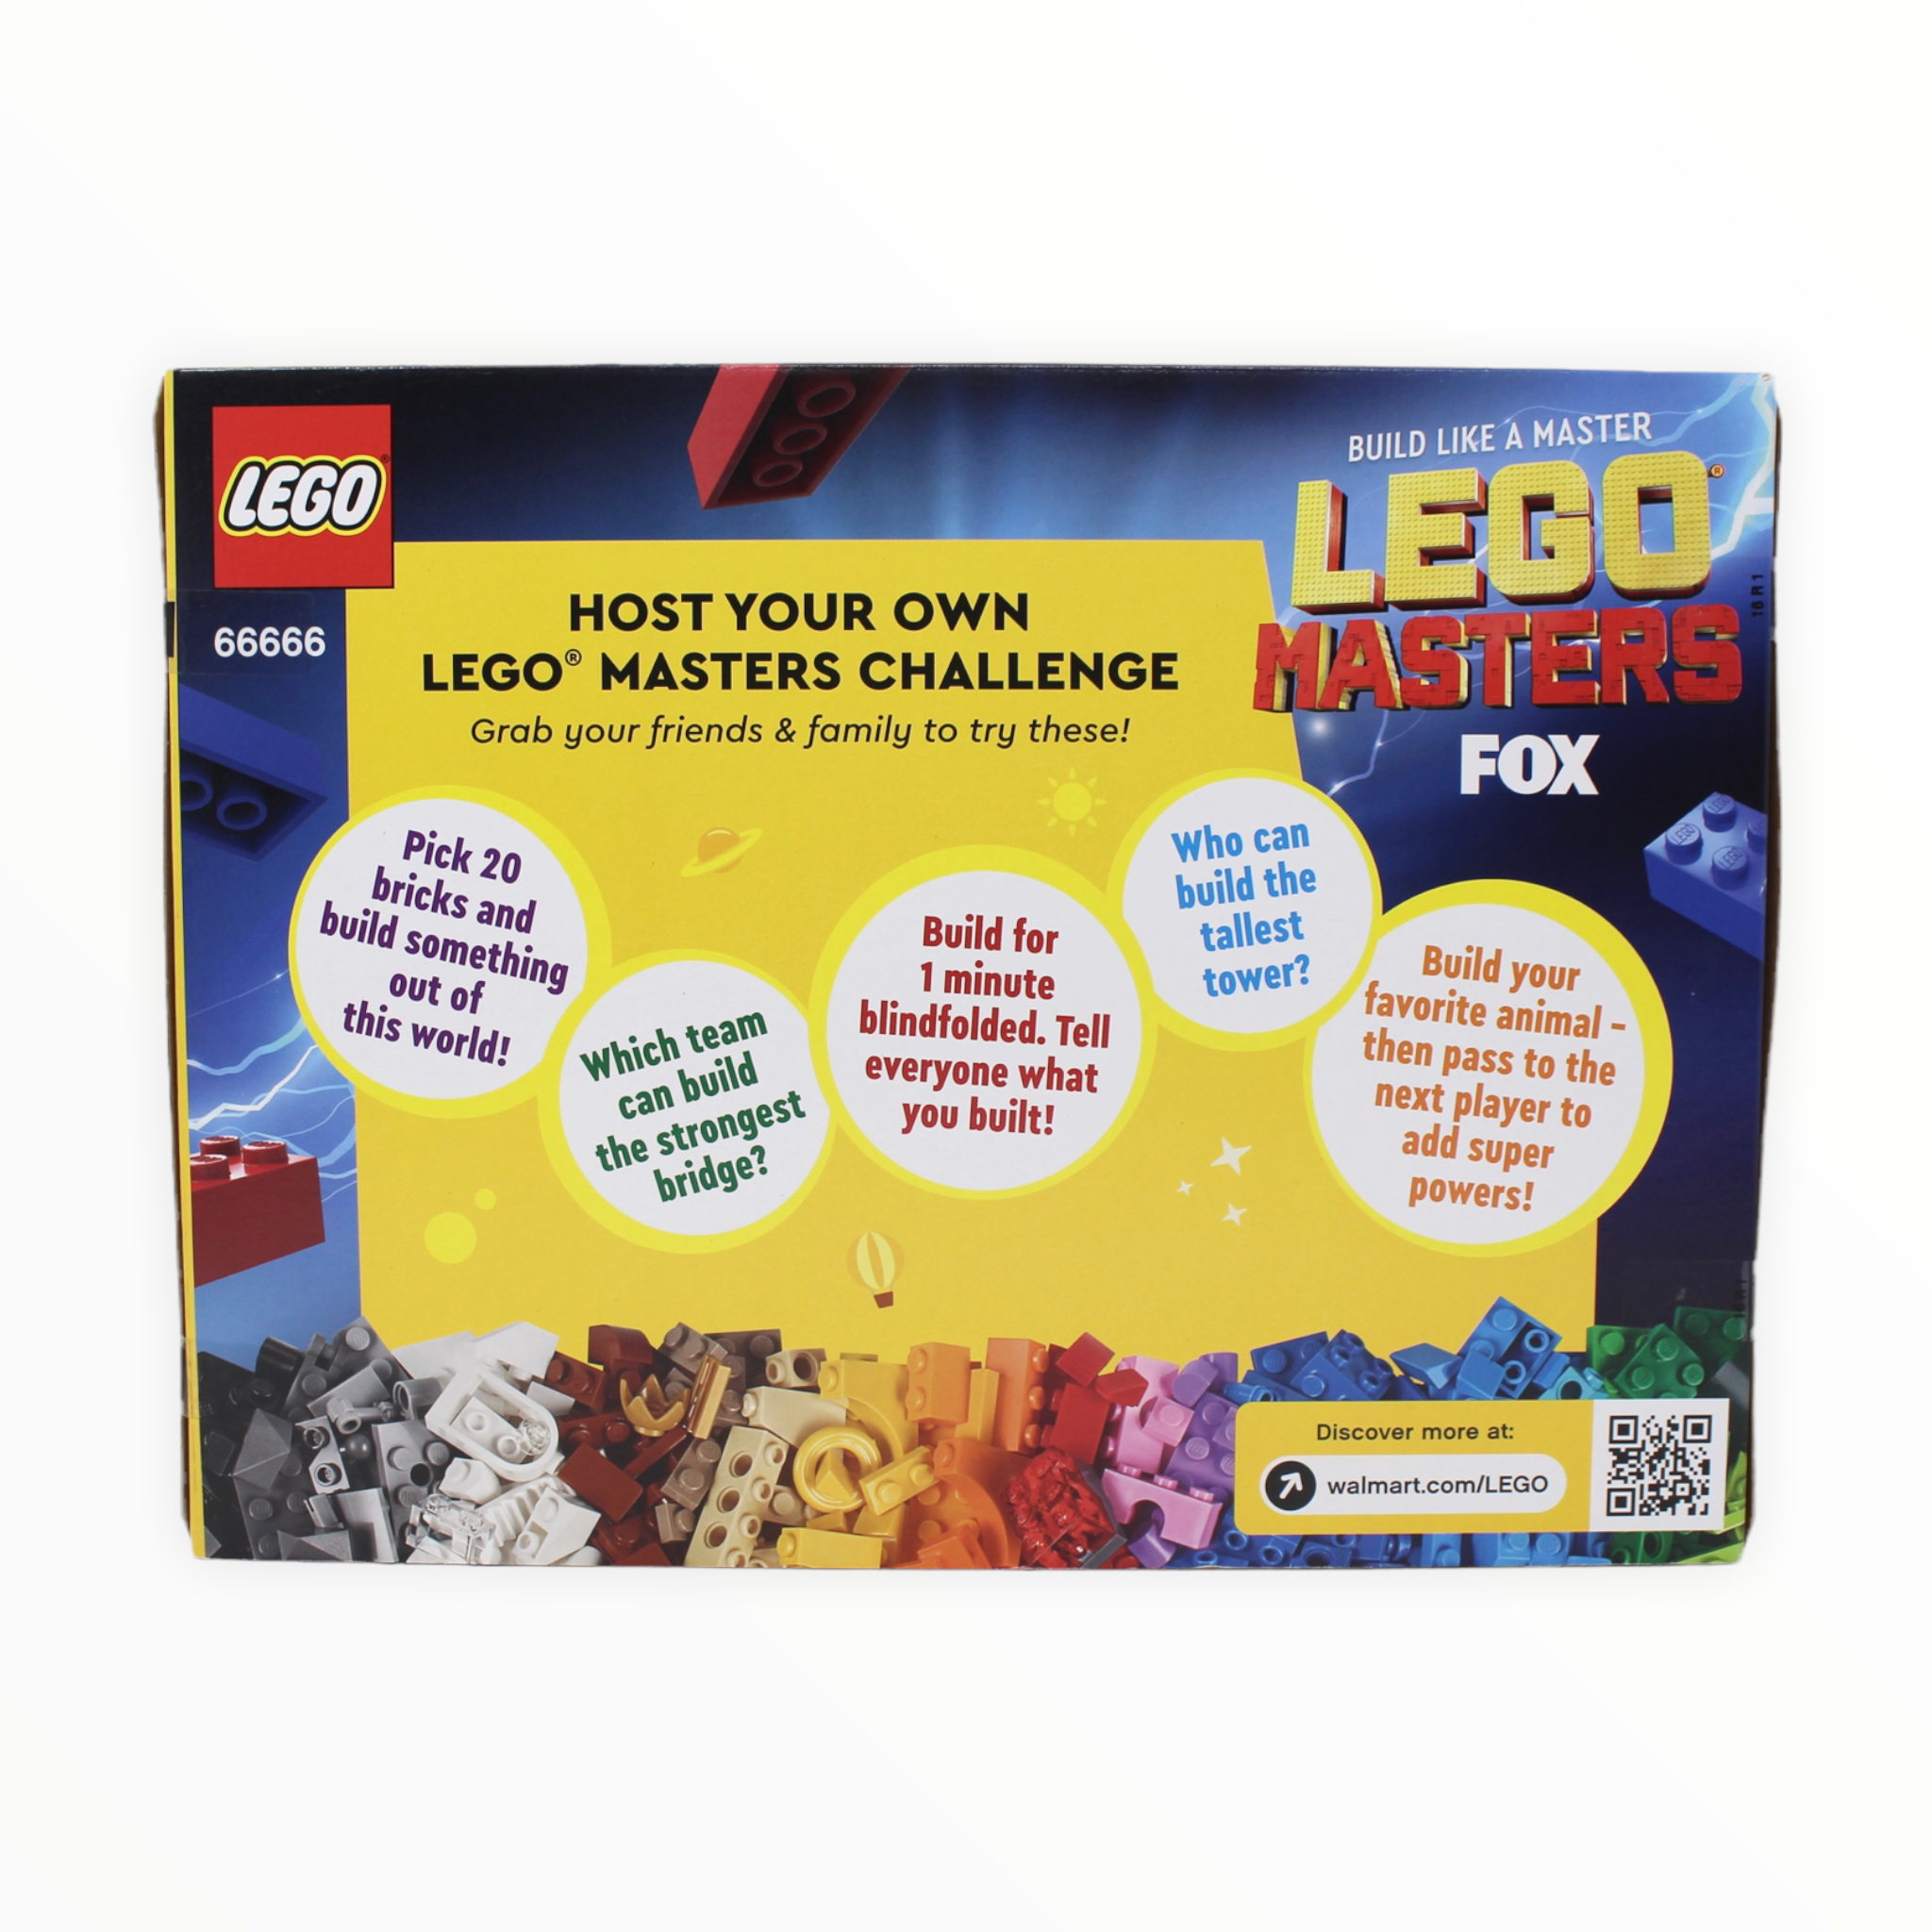 Retired Set 66666 Classic LEGO Masters Co-pack (sets 11006, 11007, 11009, 11012)